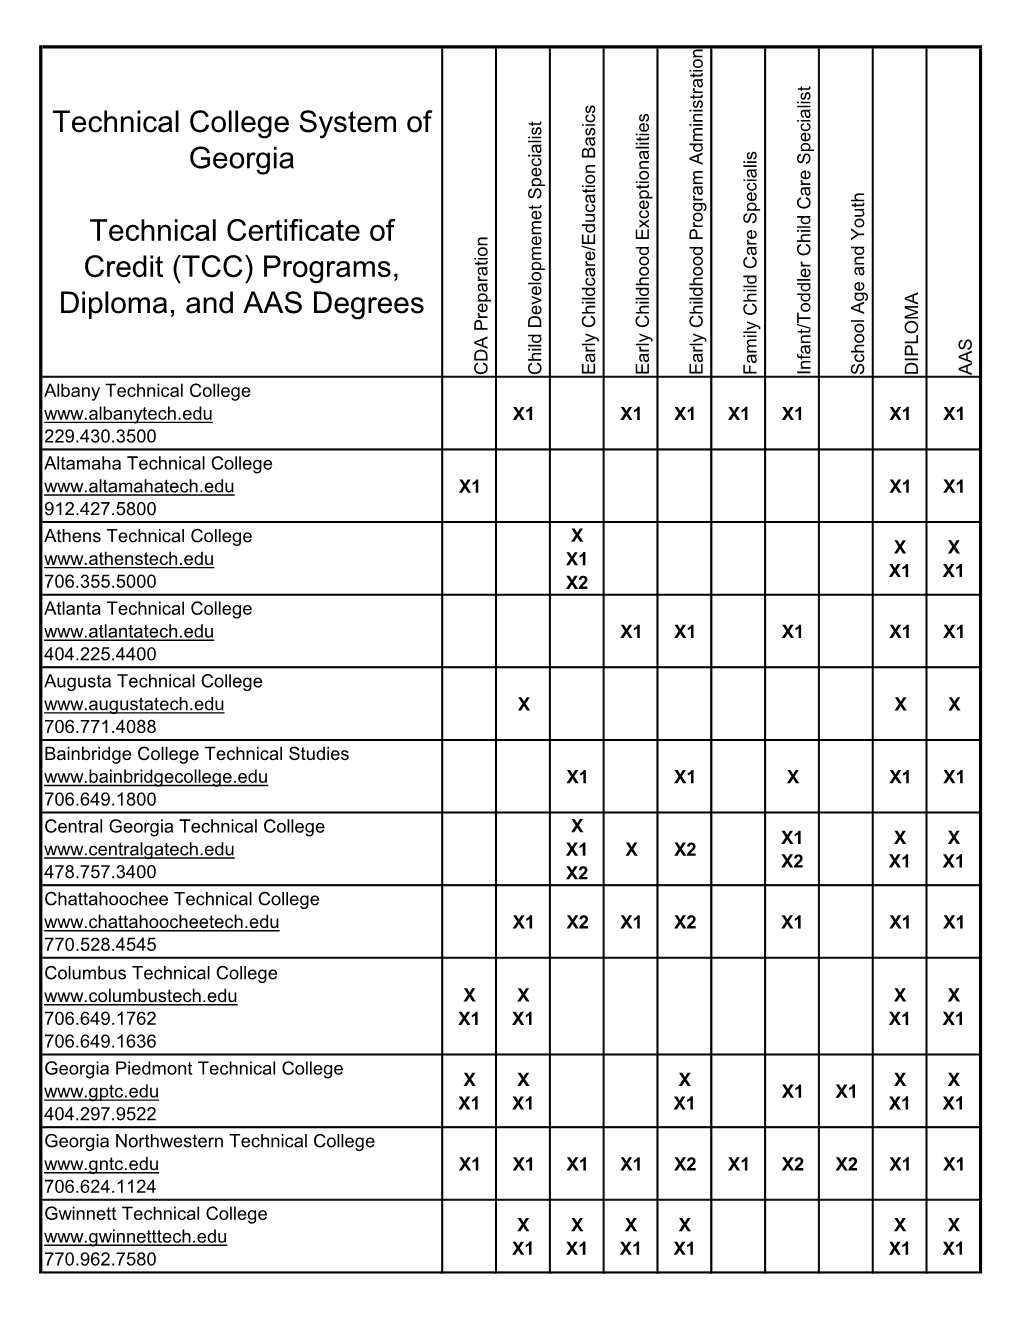 Technical College System of Georgia Technical Certificate of Credit (TCC